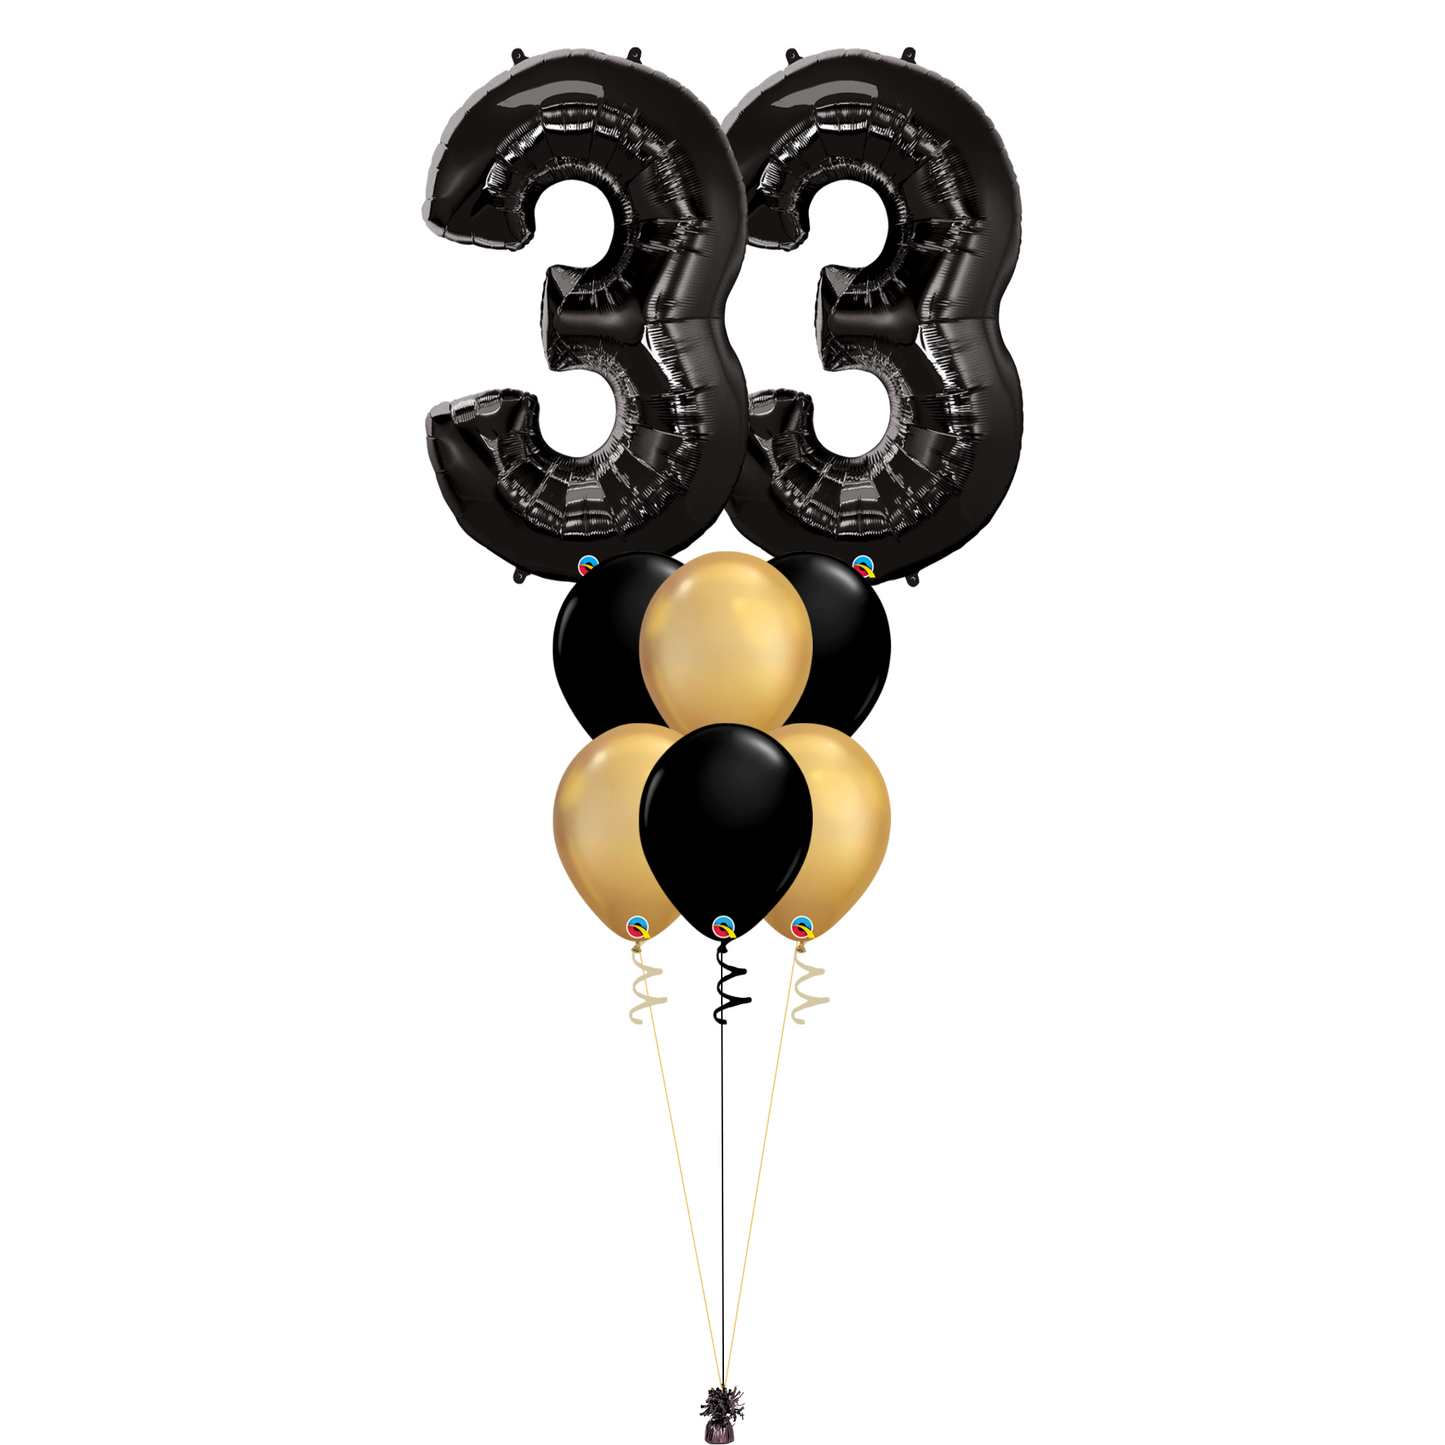 Bouquet of 8 Balloons - Black & Chrome Gold